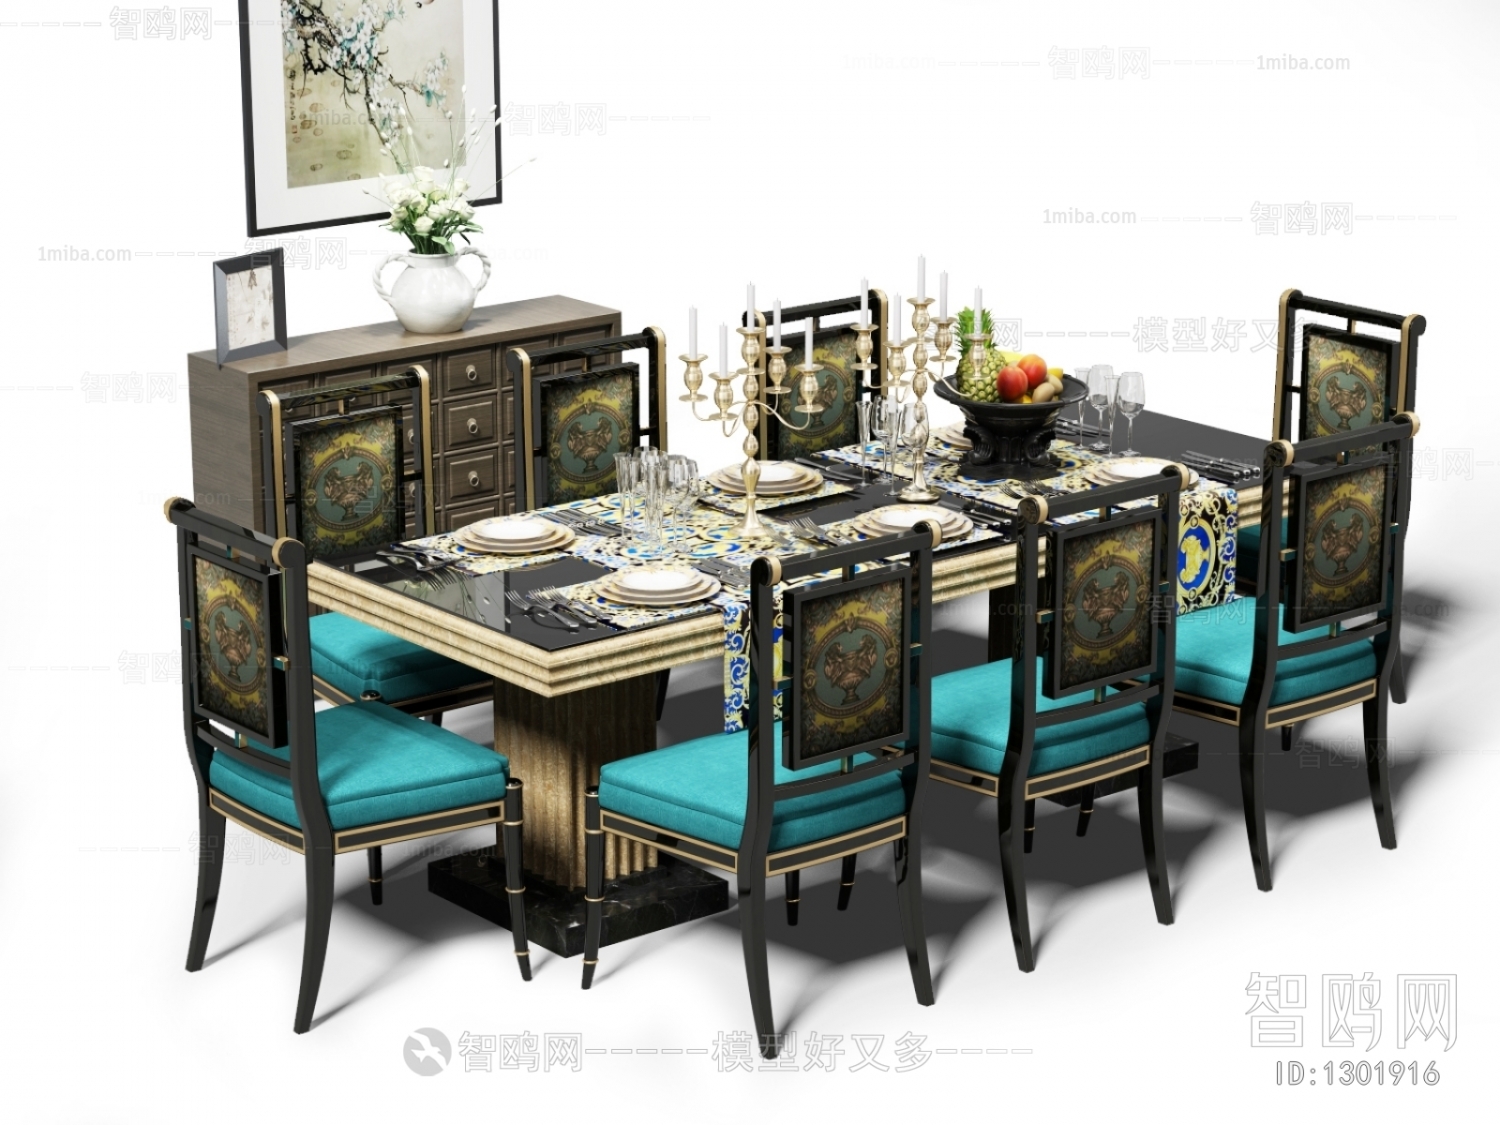 New Classical Style Dining Table And Chairs